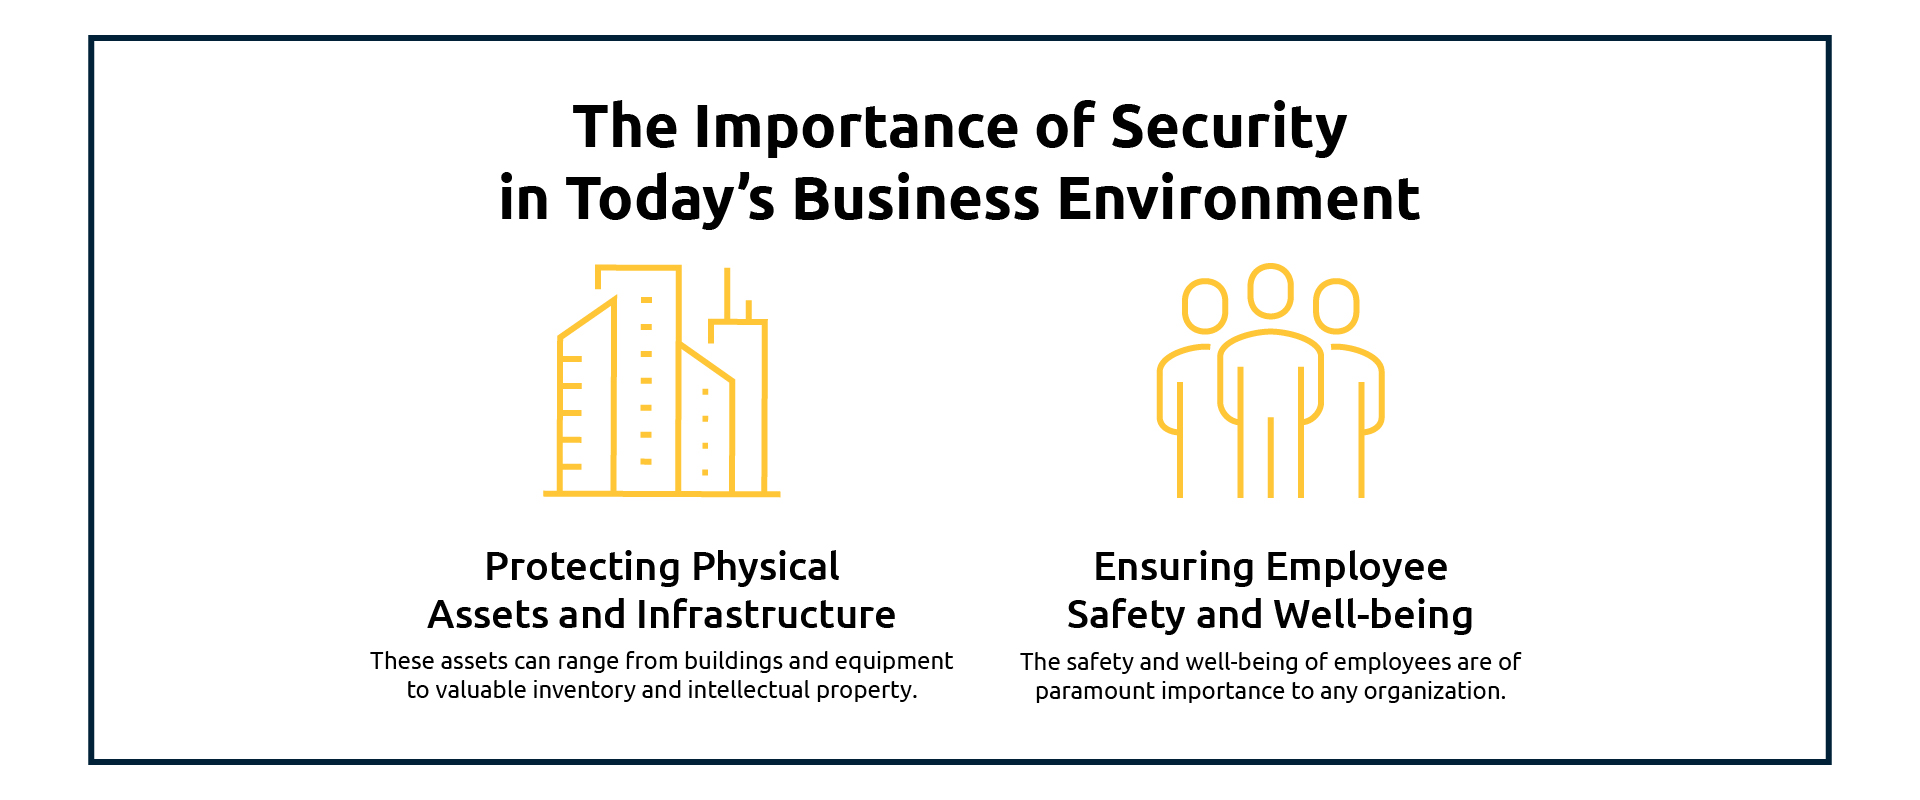 The Importance of Security in Today’s Business Environment